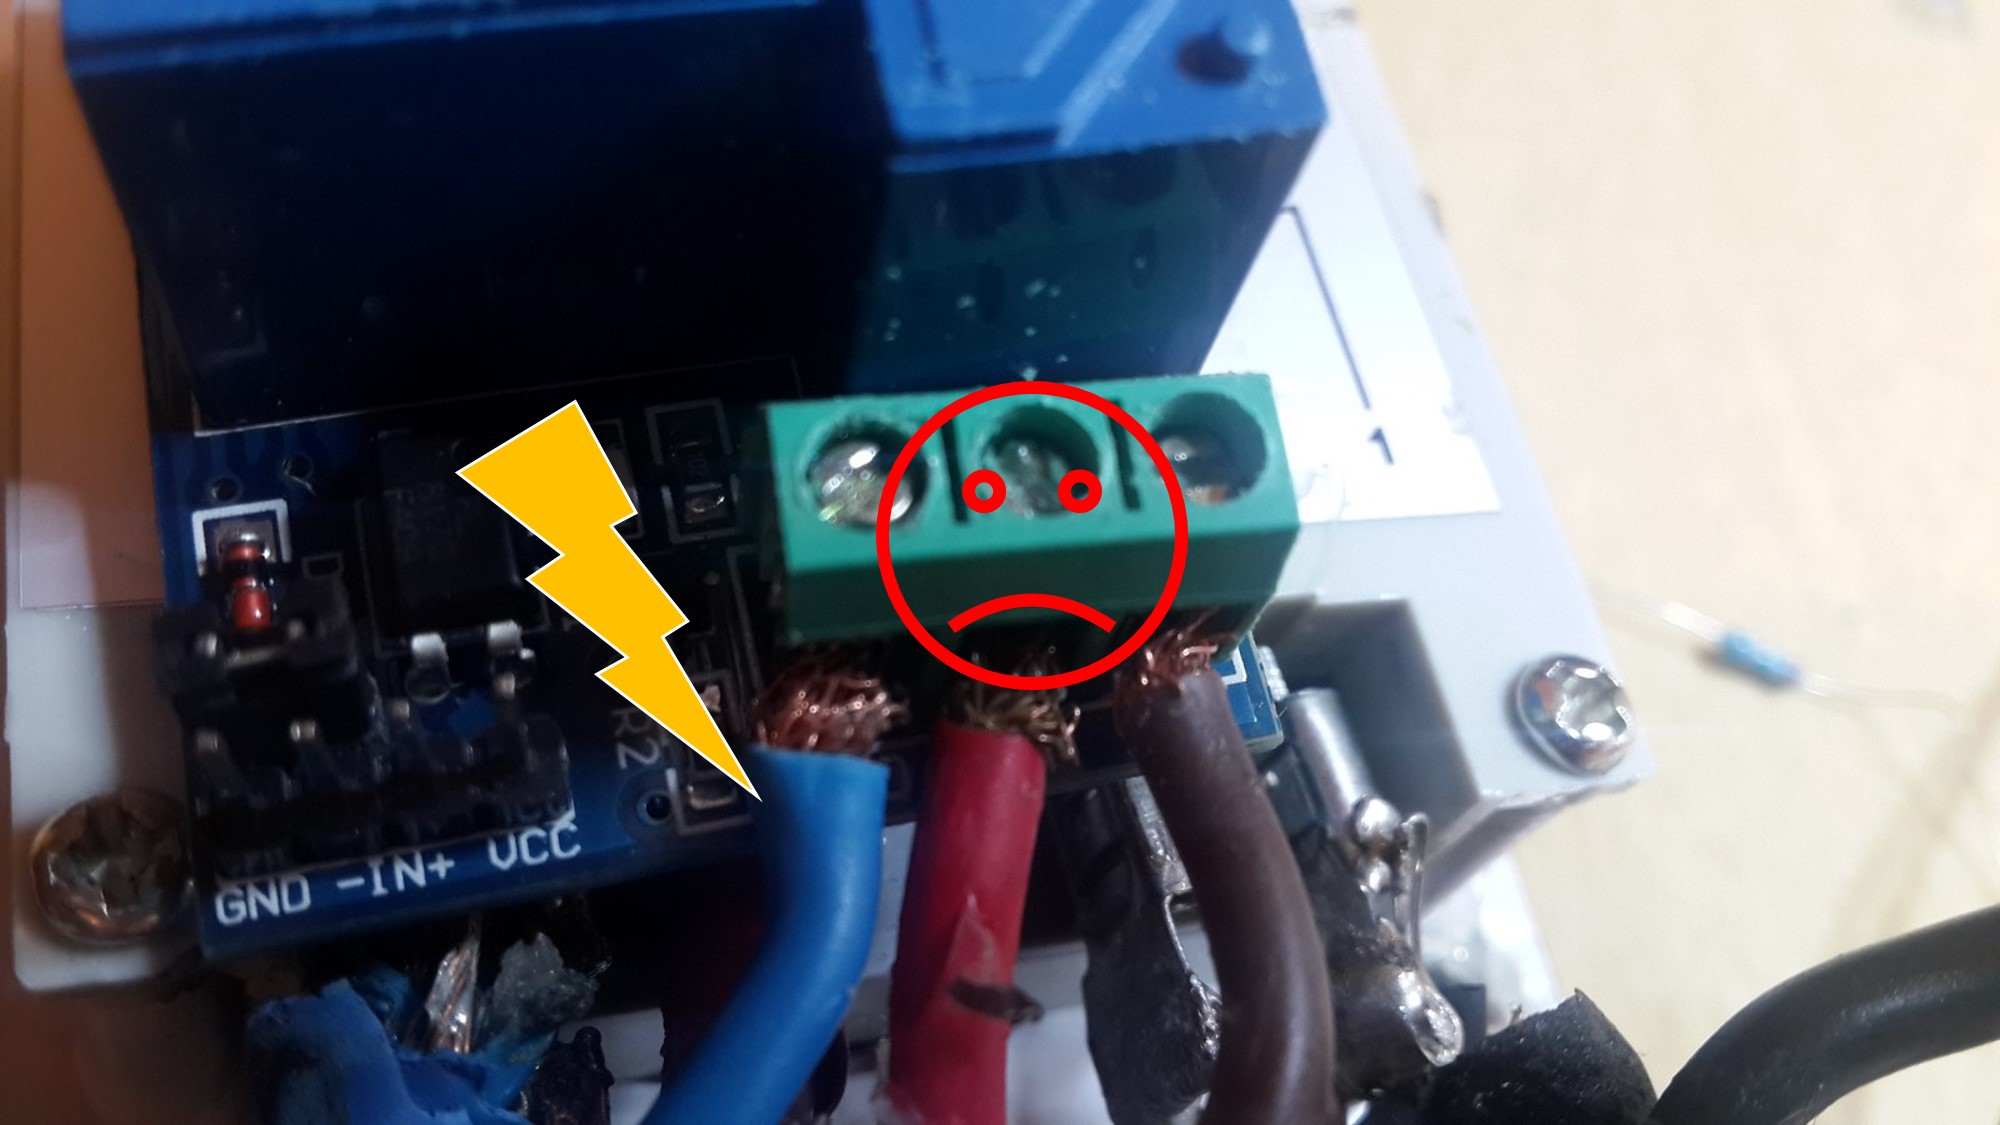 Relay exposed wires